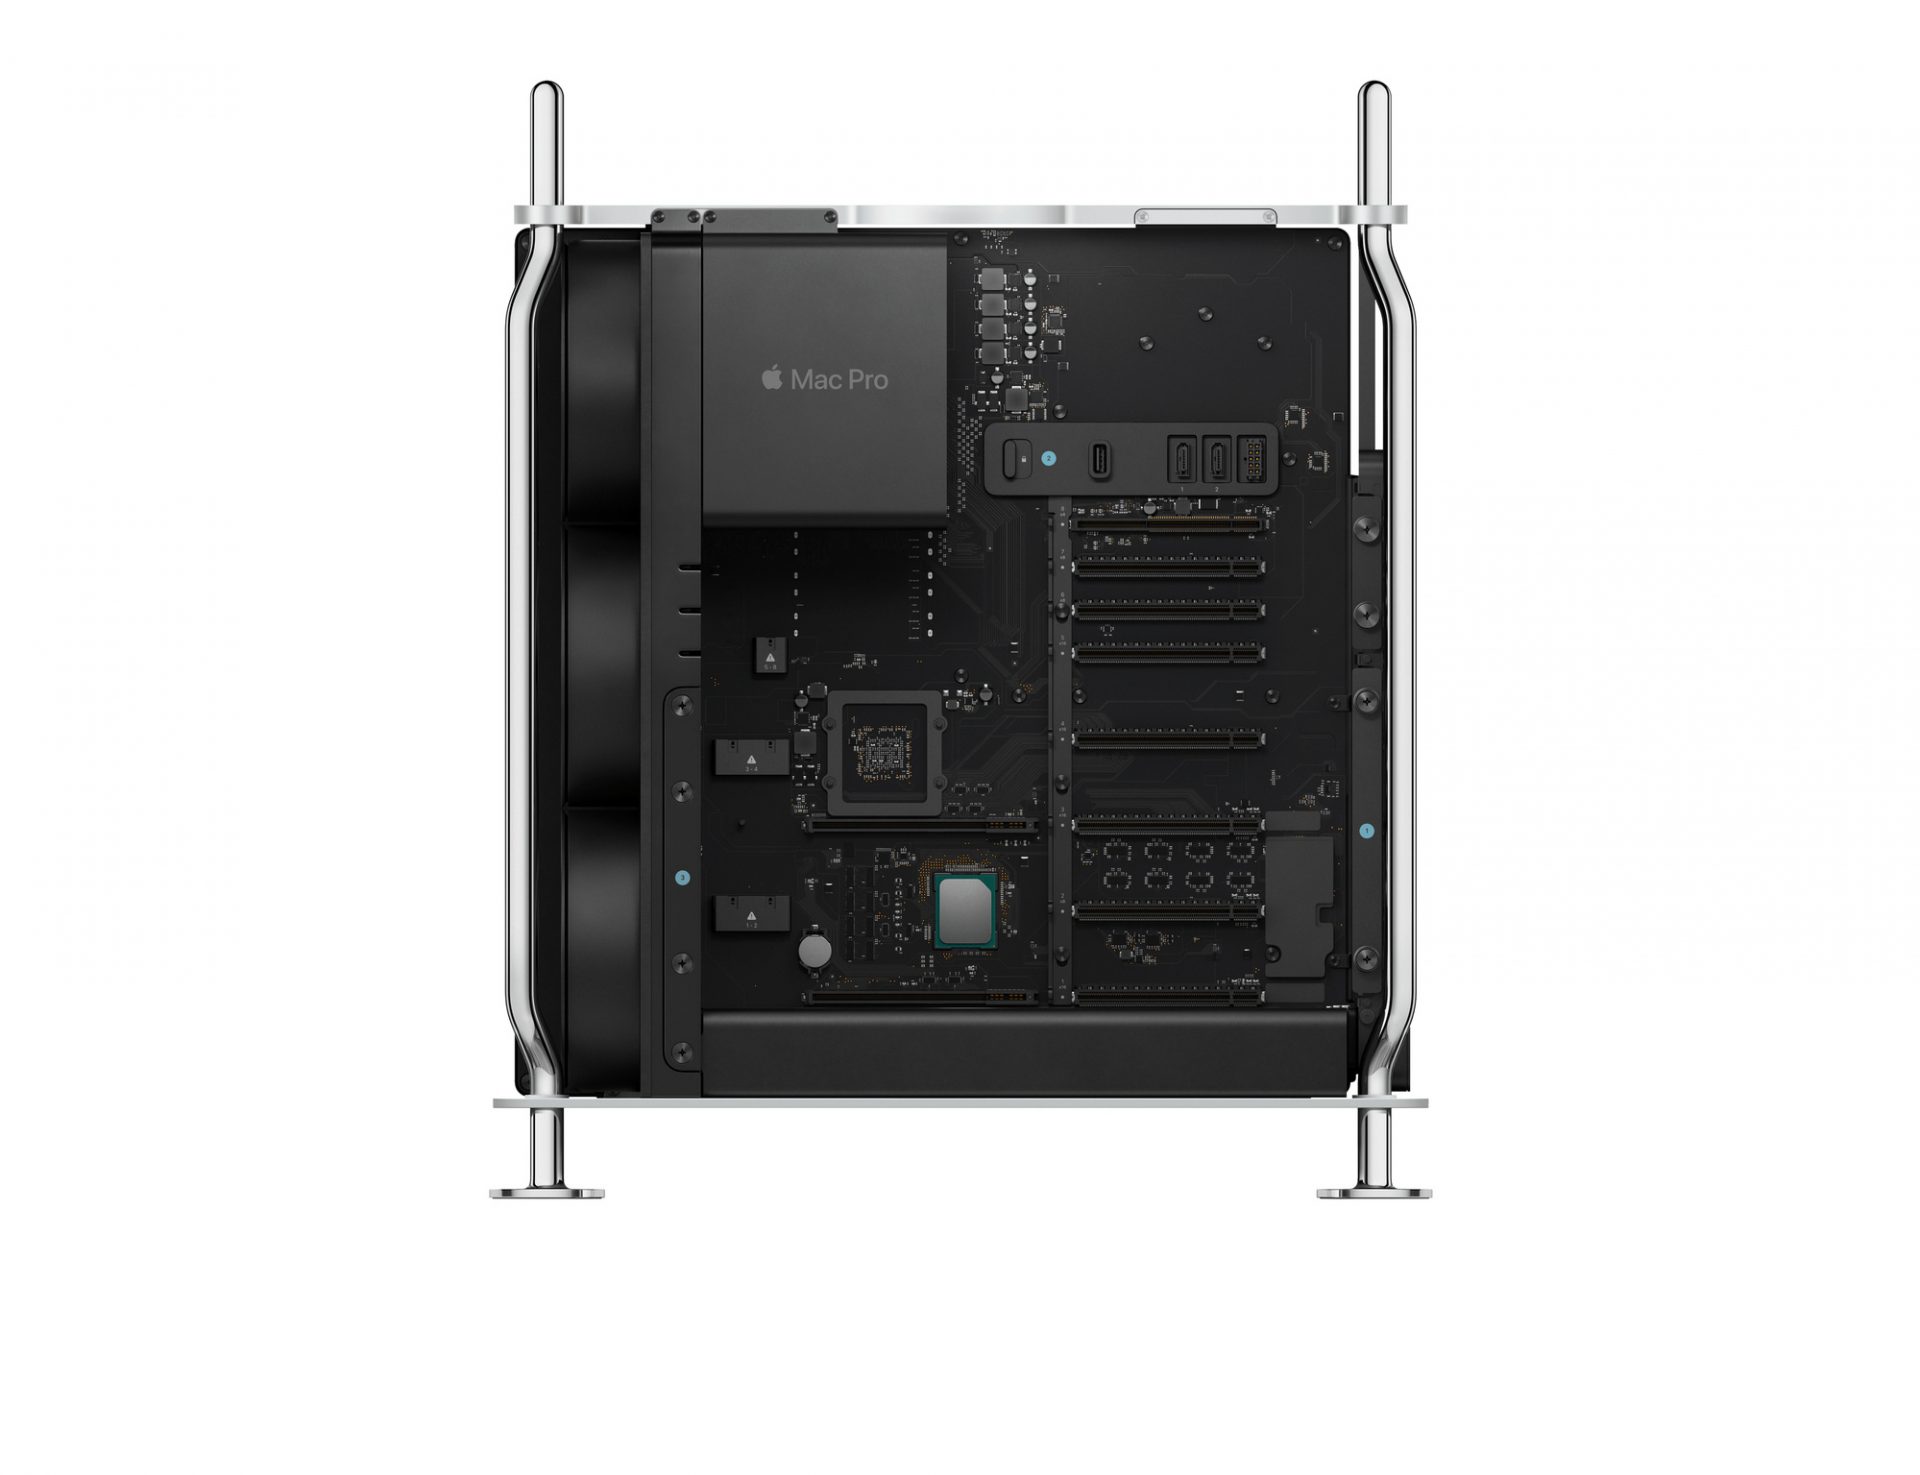 Apple upgrades Mac Pro with contemporary AMD graphics playing cards that bring as a lot as four Navi 21 GPUs and 128 GB of GDDR6 VRAM